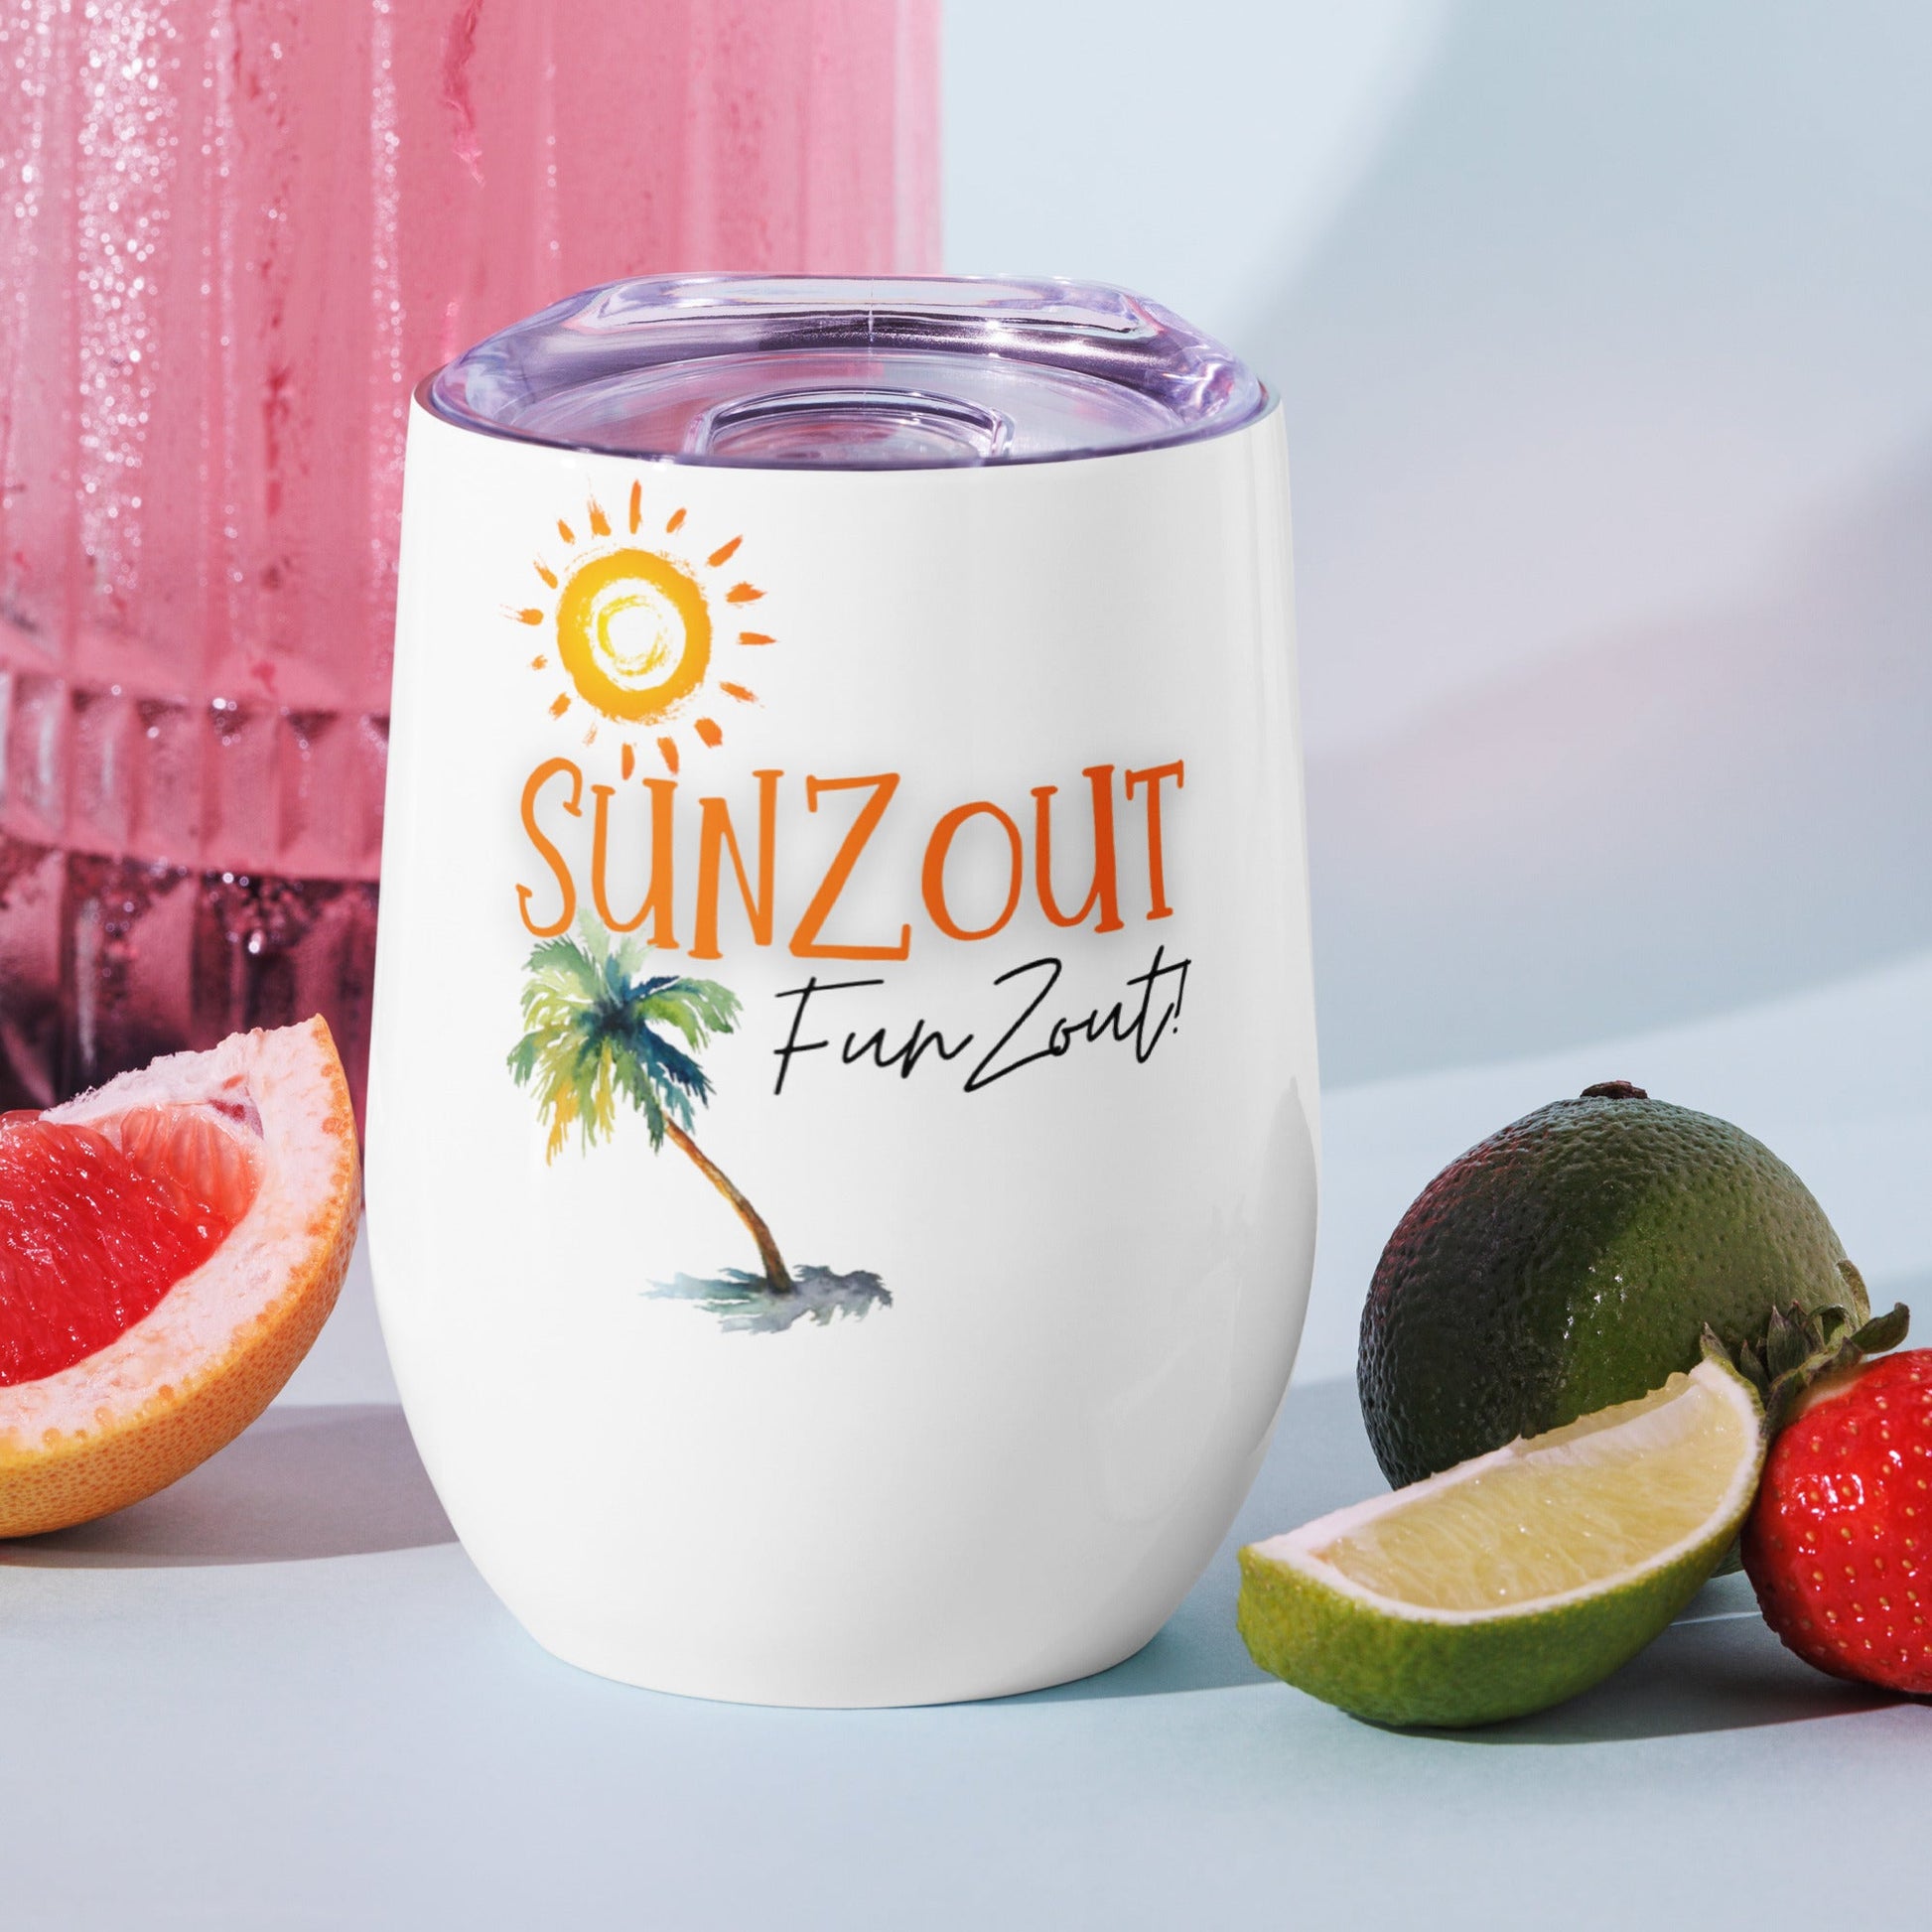 Sunzout Funzout Wine tumbler - Sunzout Outdoor Spaces LLC